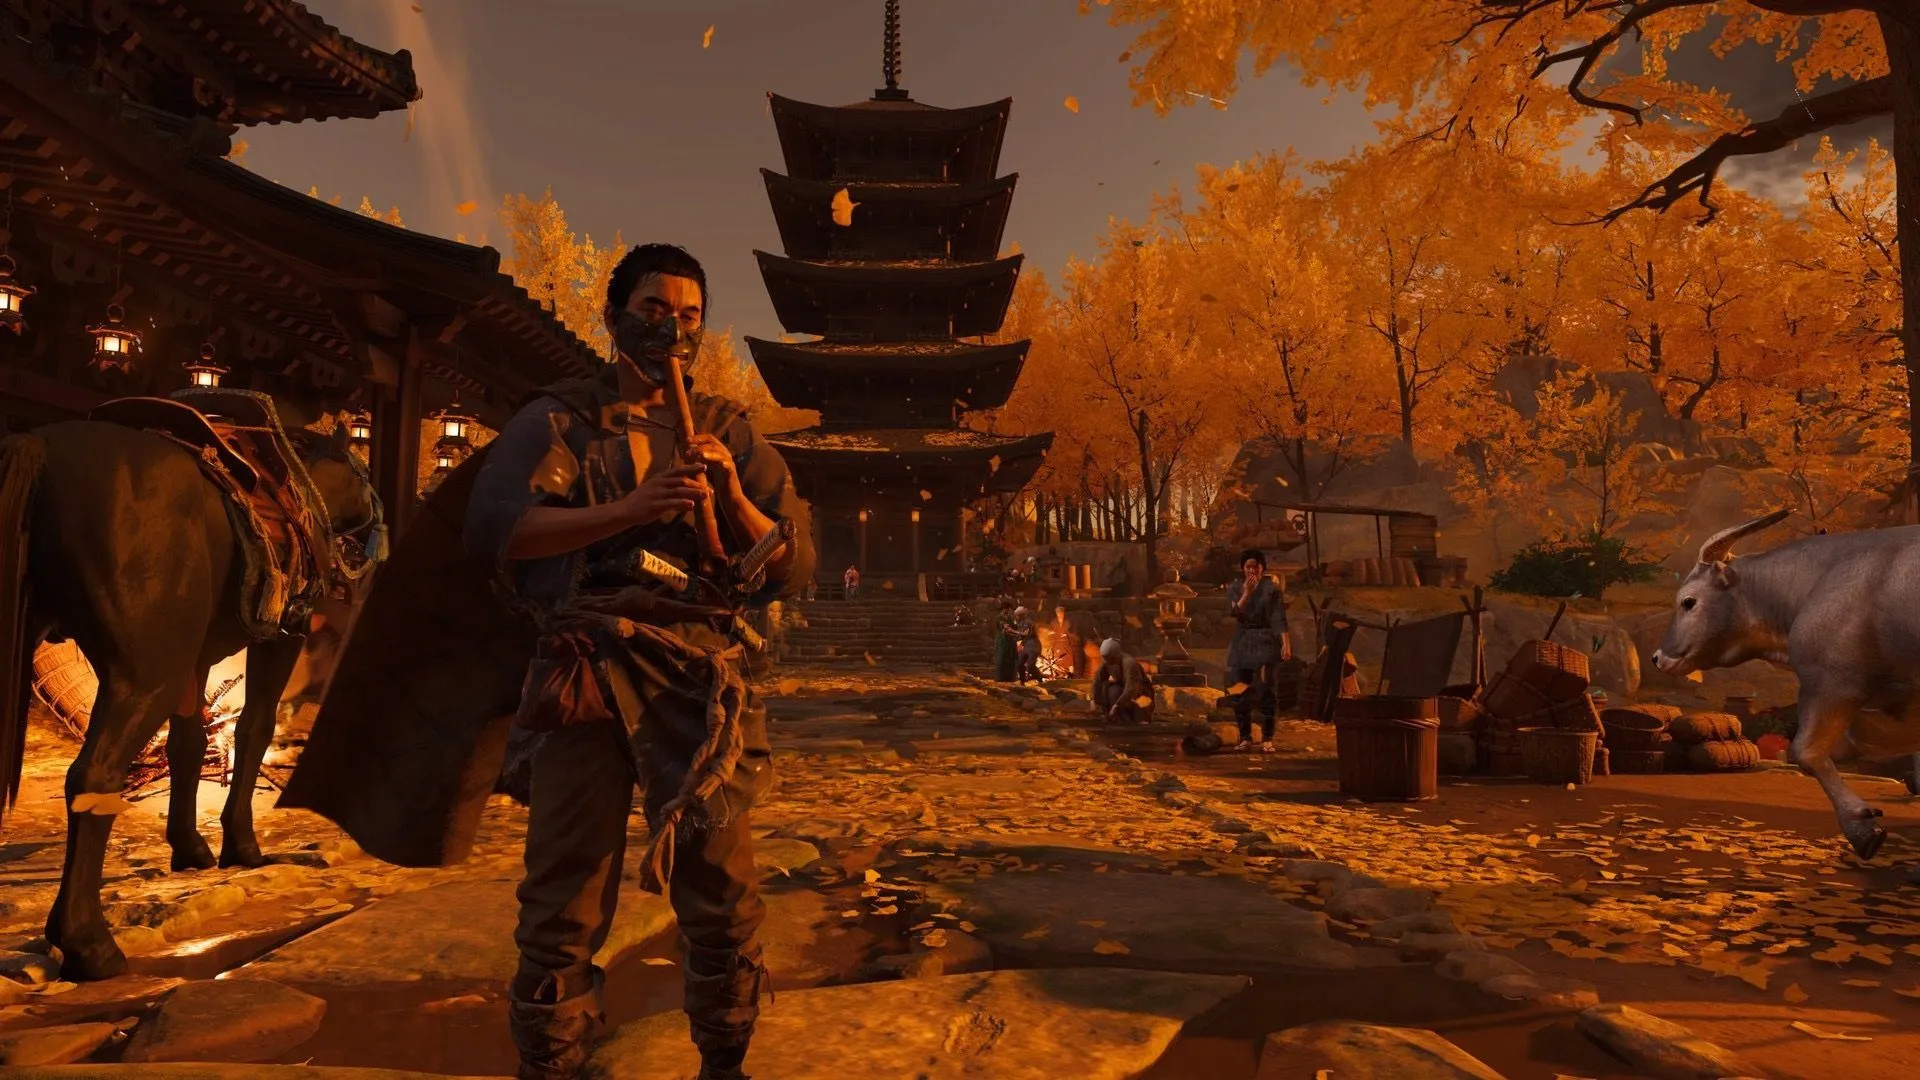 Ghost Of Tsushima 2 Shouldn't Fear Assassin's Creed: Japan